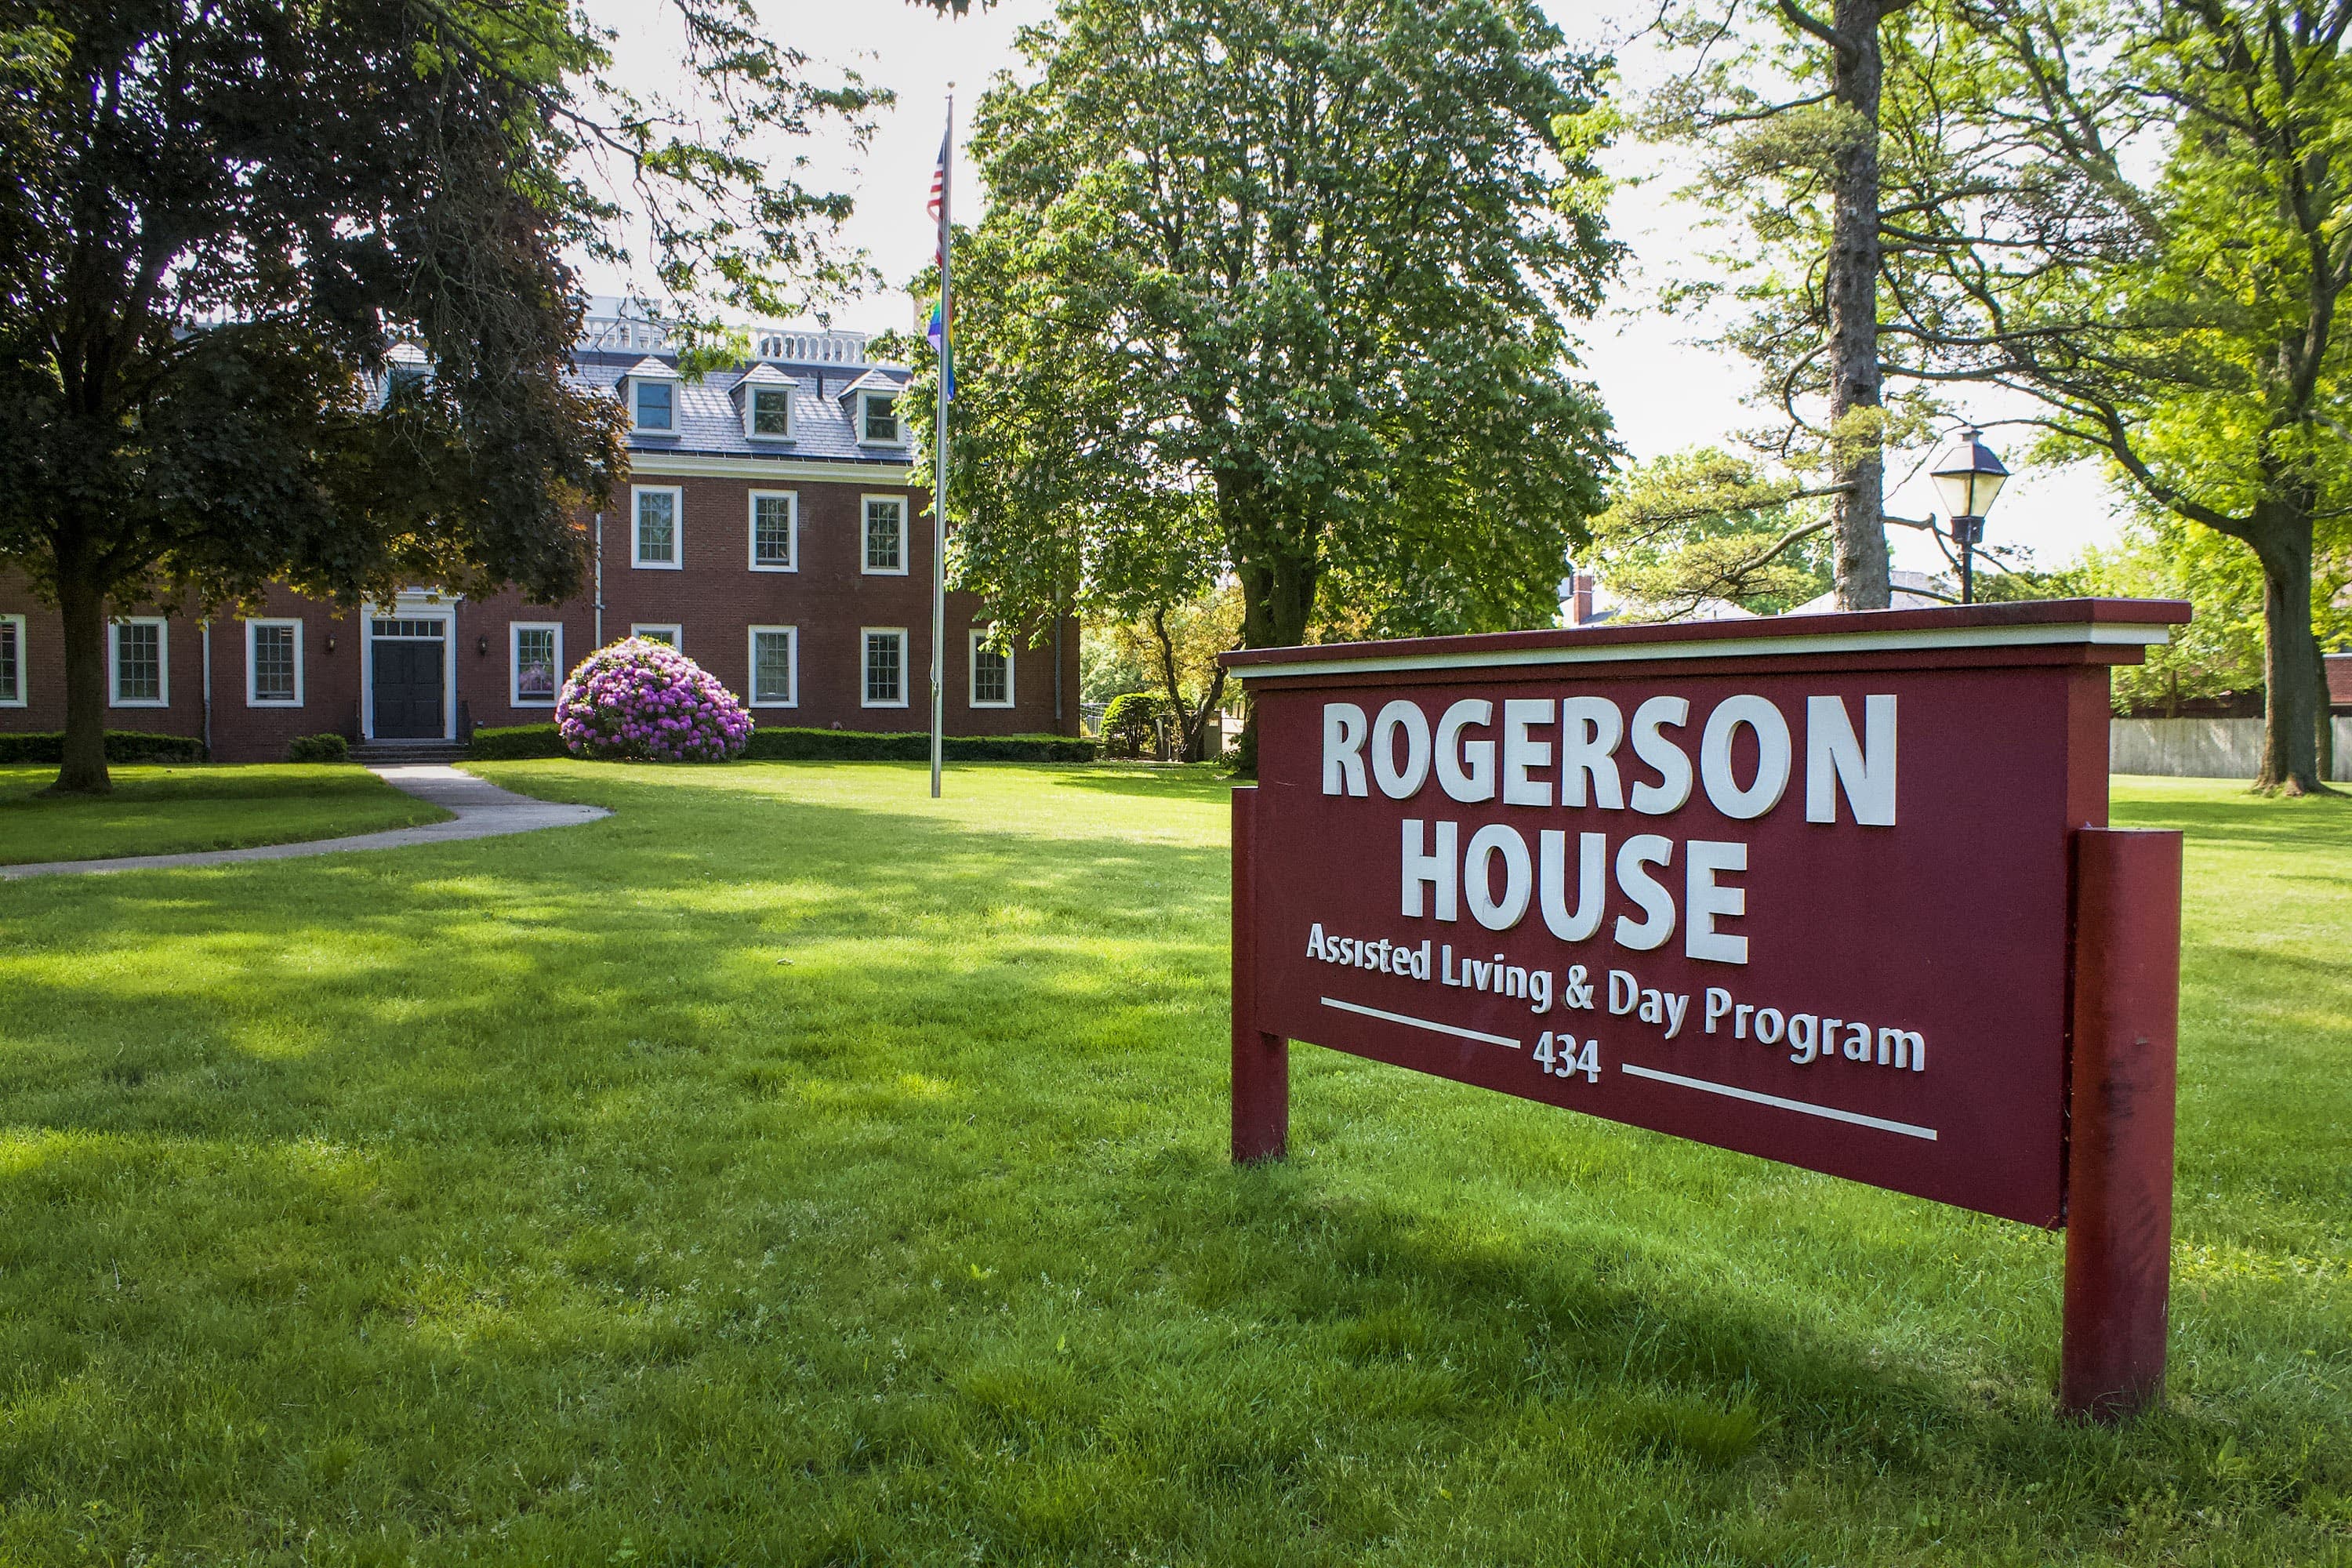 Rogerson House Assisted Living & Day Care Program in Jamaica Plain is one of 255 assisted living facilities in Mass. (Miriam Wasser/WBUR)